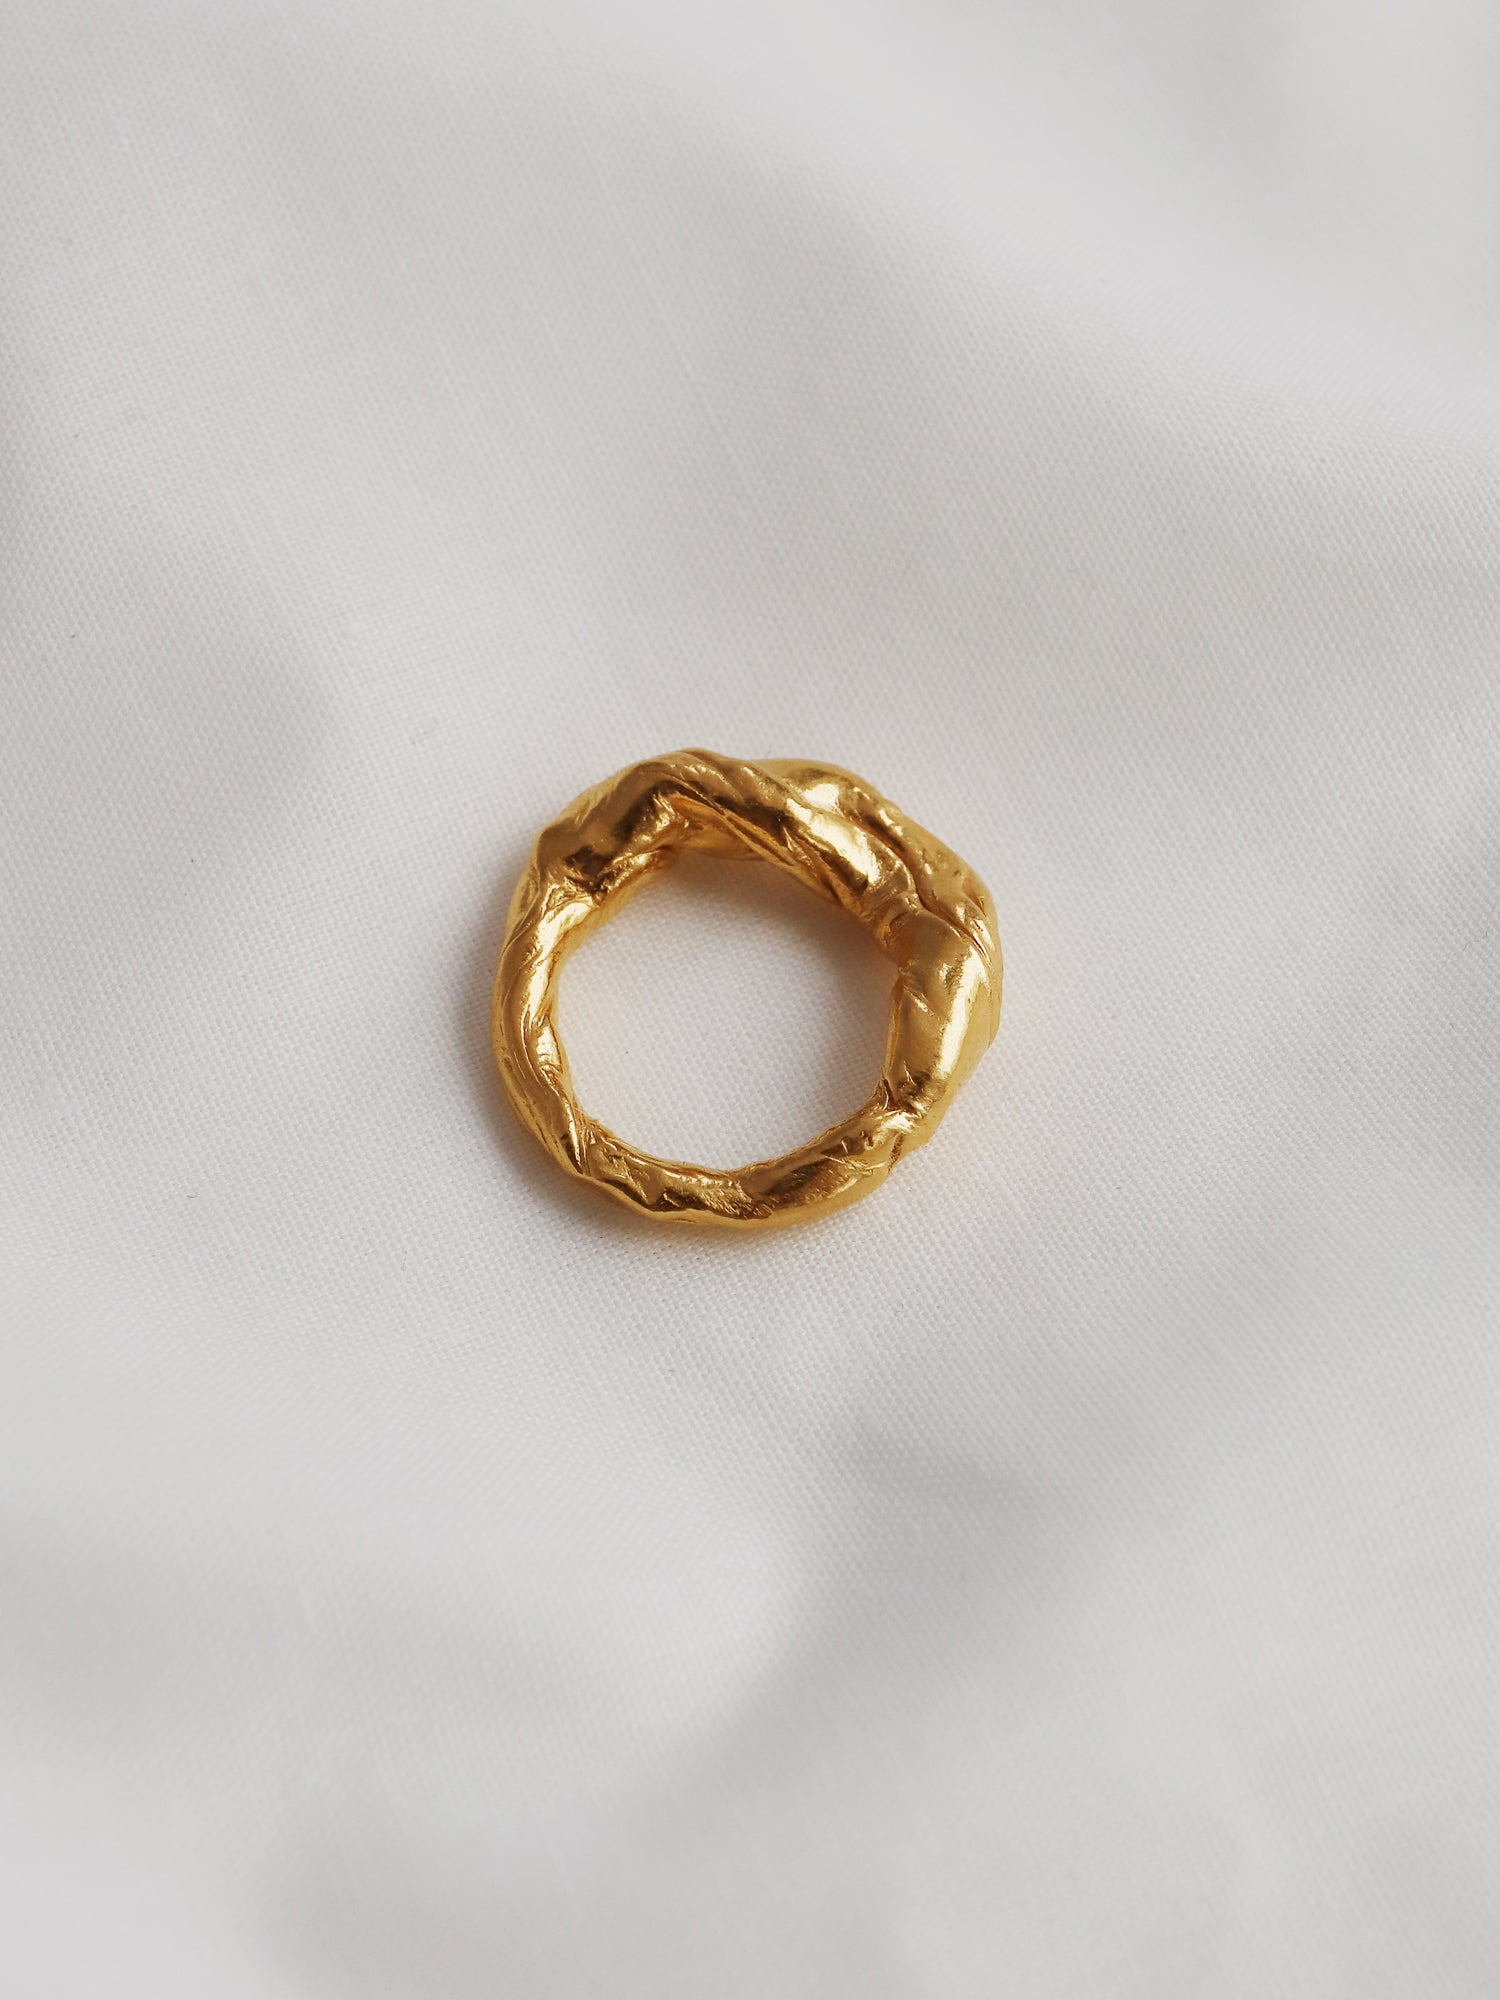 Sunday Ring - Gold Plated Vermeil